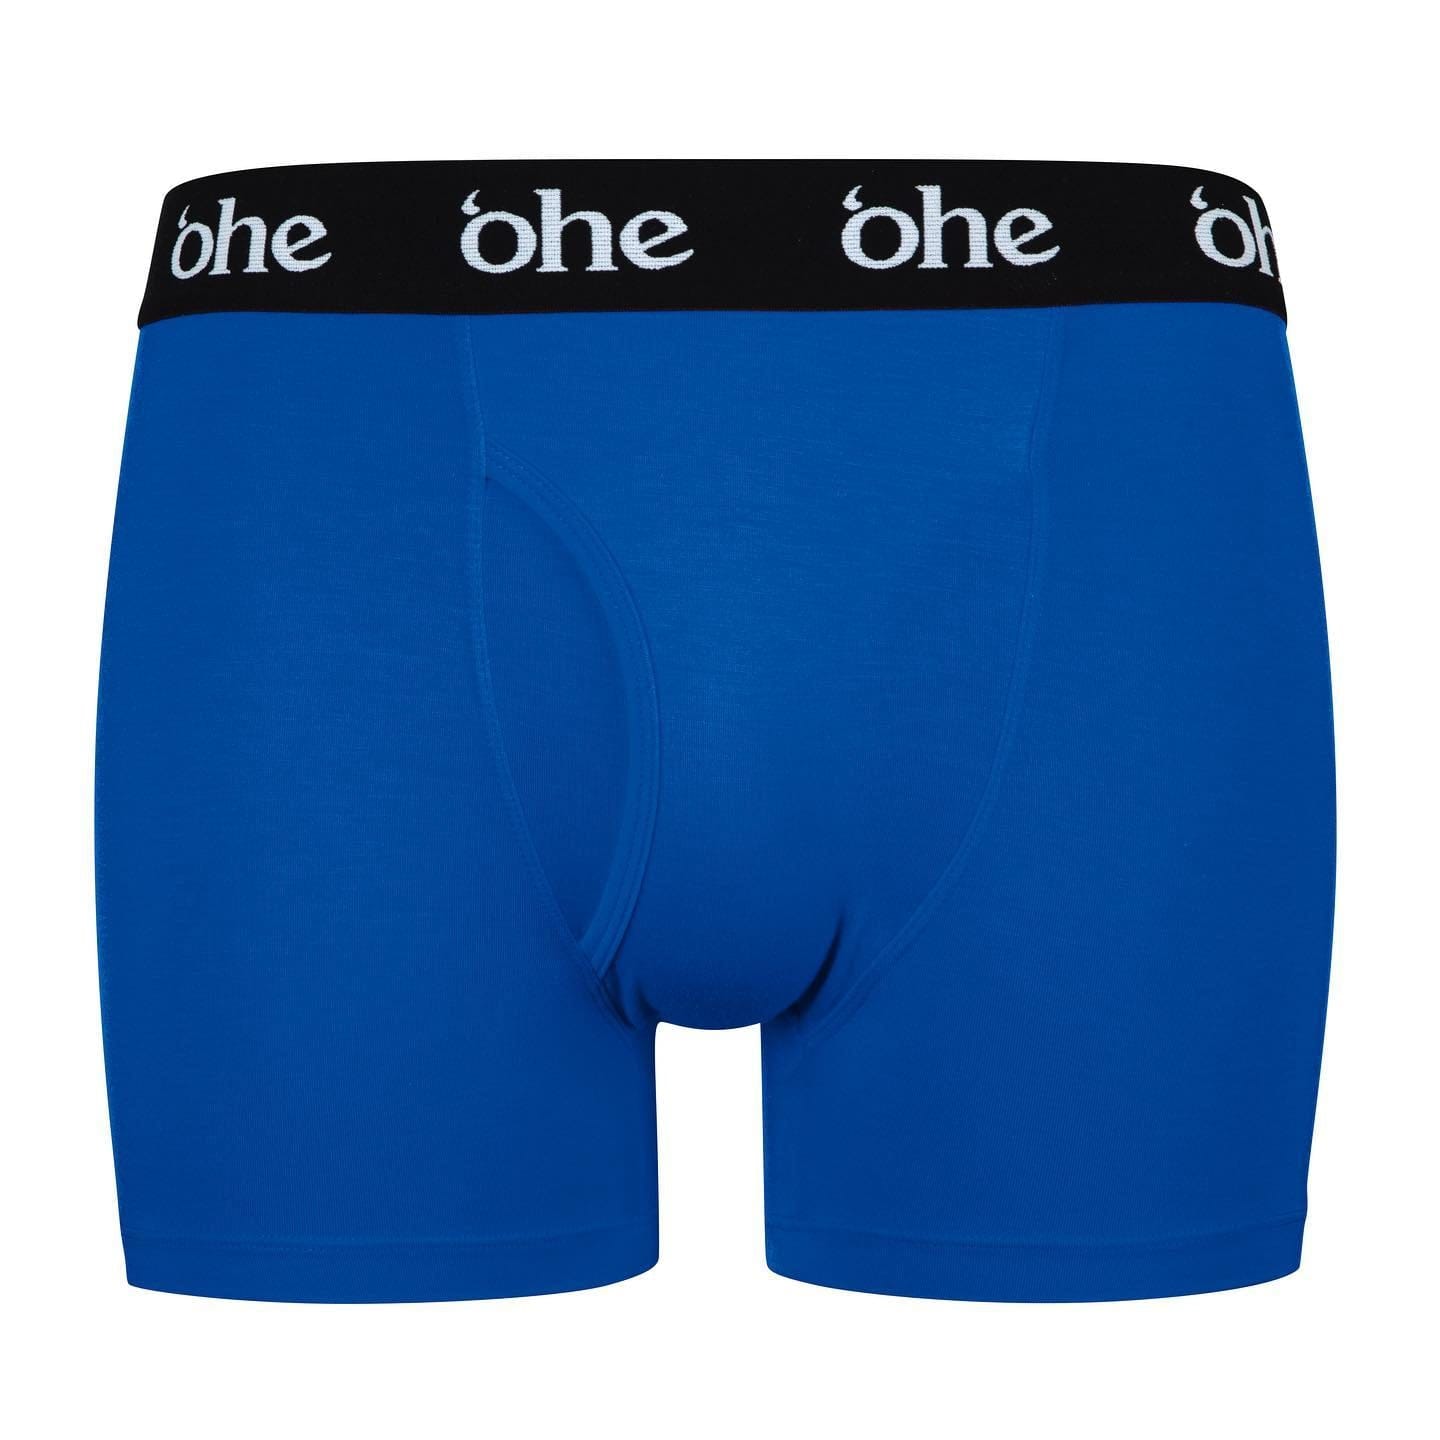 Front view of blue men's bamboo underwear boxer shorts with black waist band and white 'ohe logo